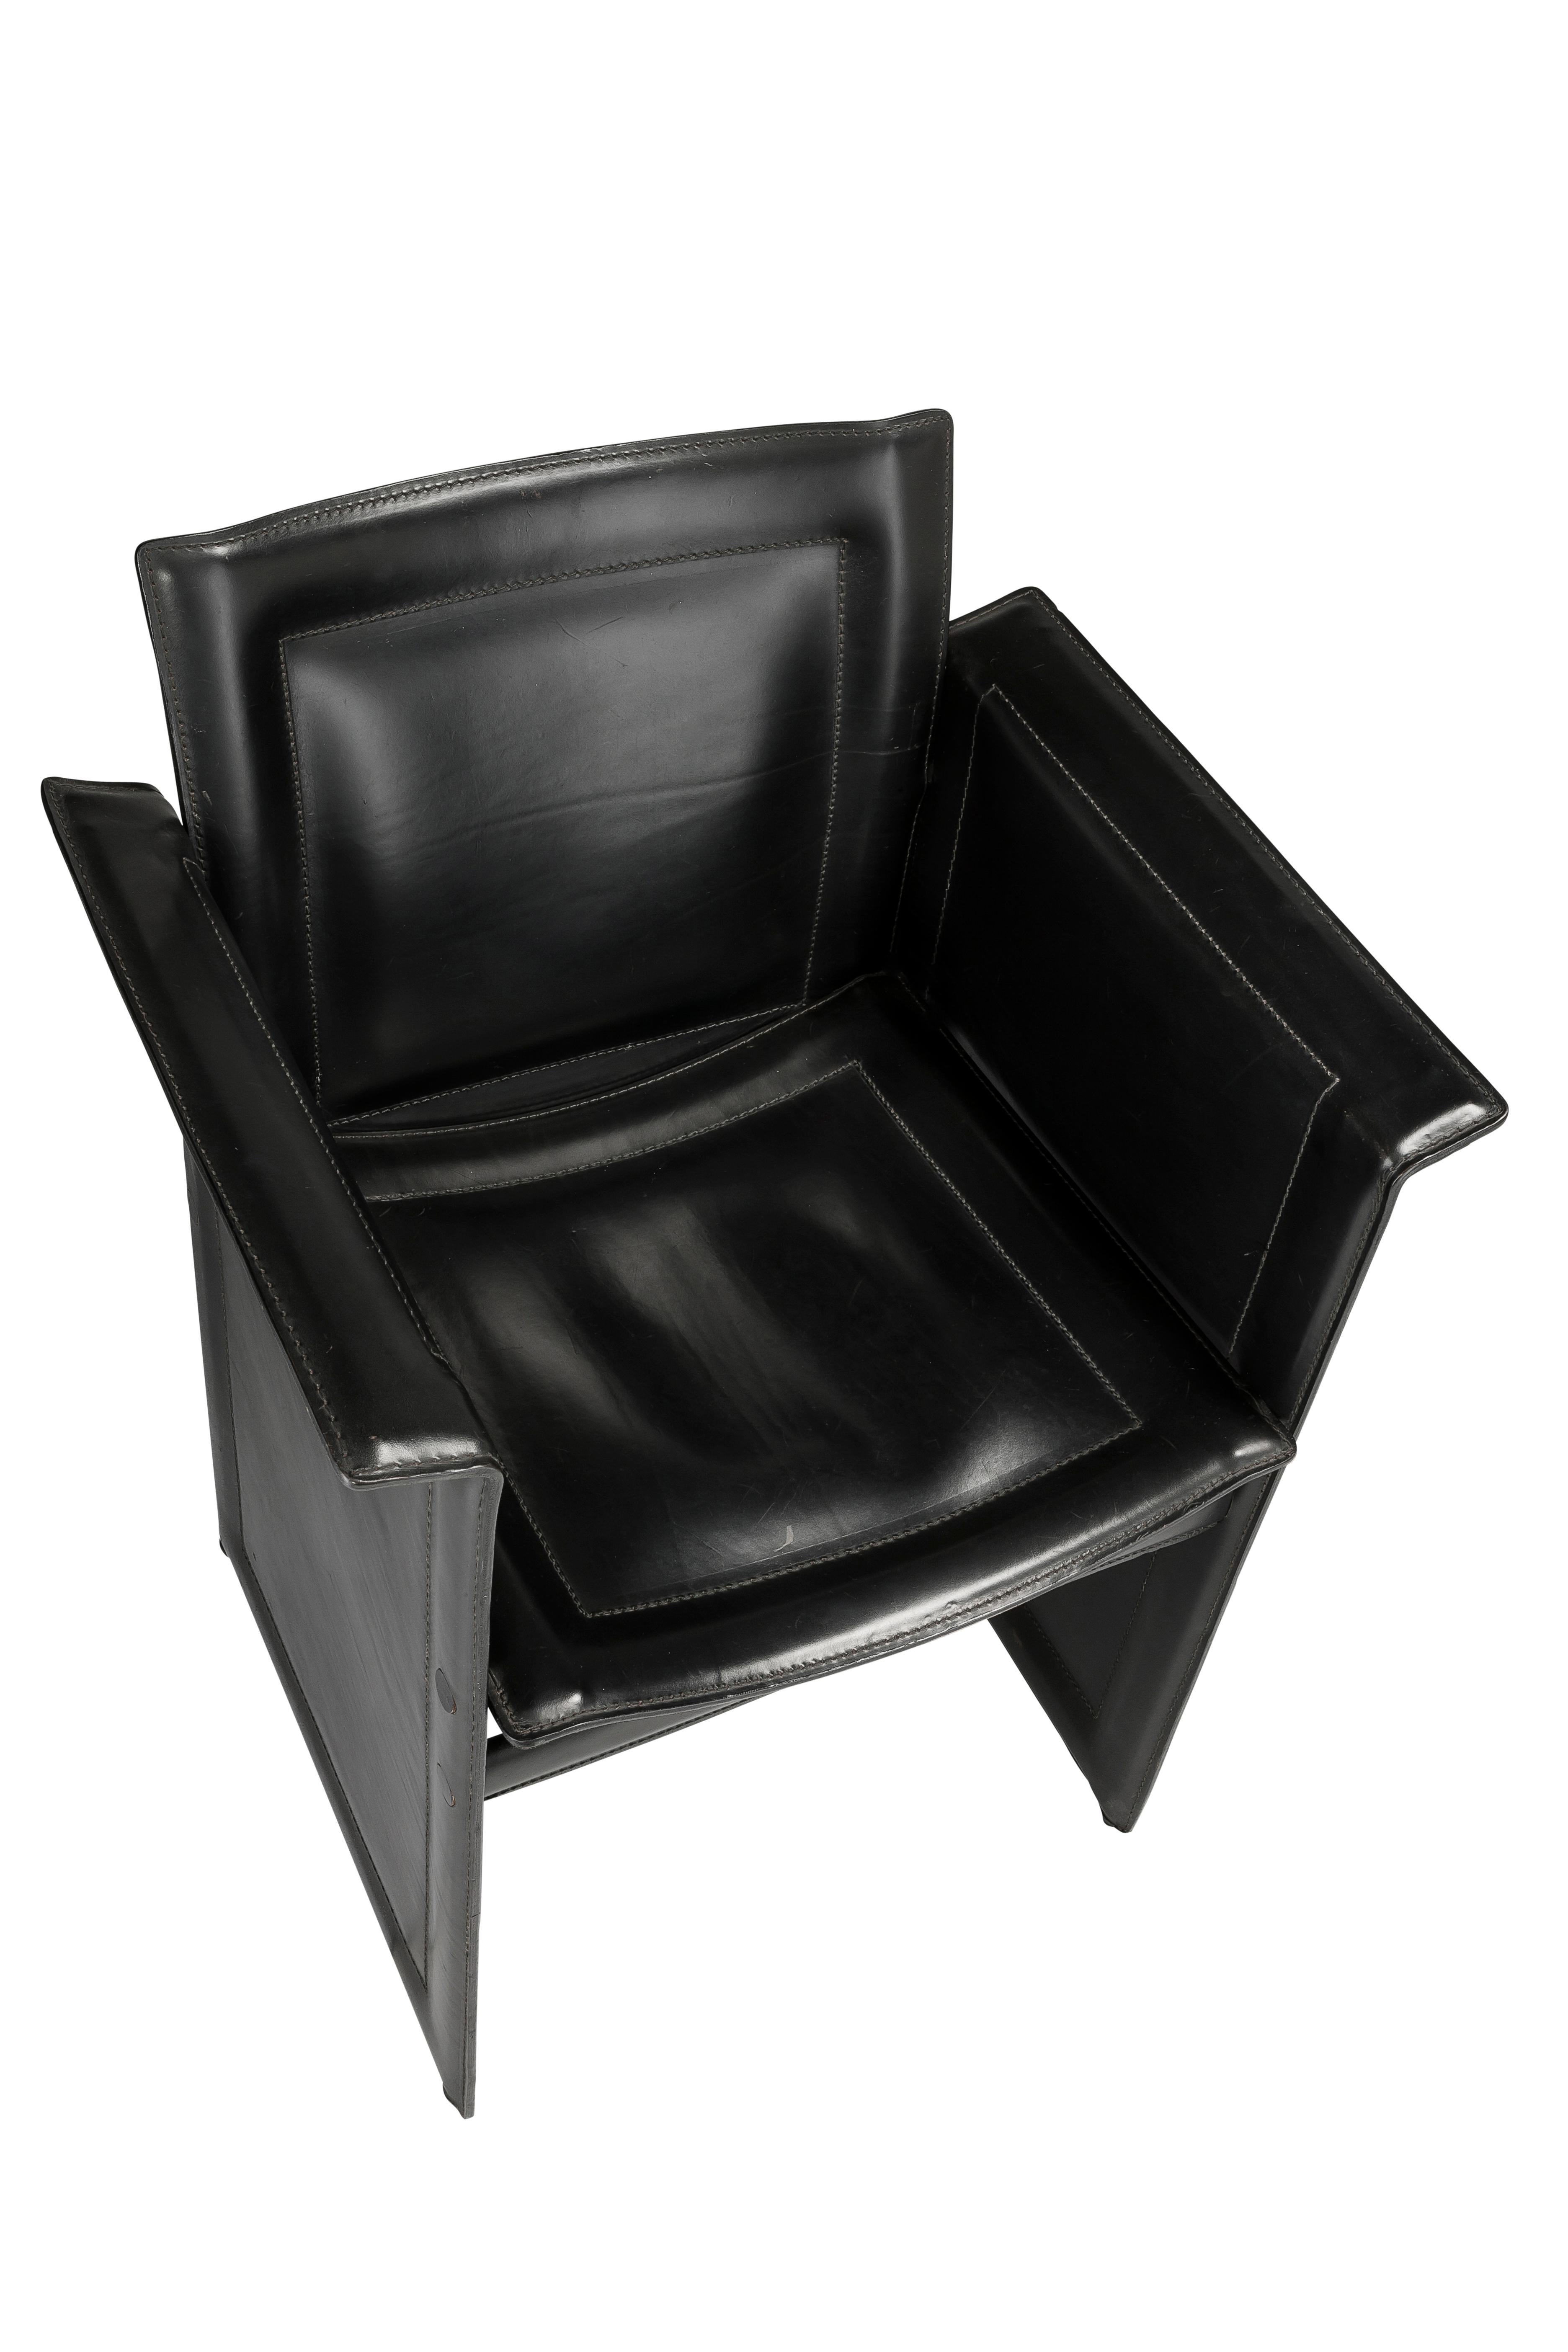 South African Postmodern Side Chair in Leather by Arrben, circa 1980s For Sale